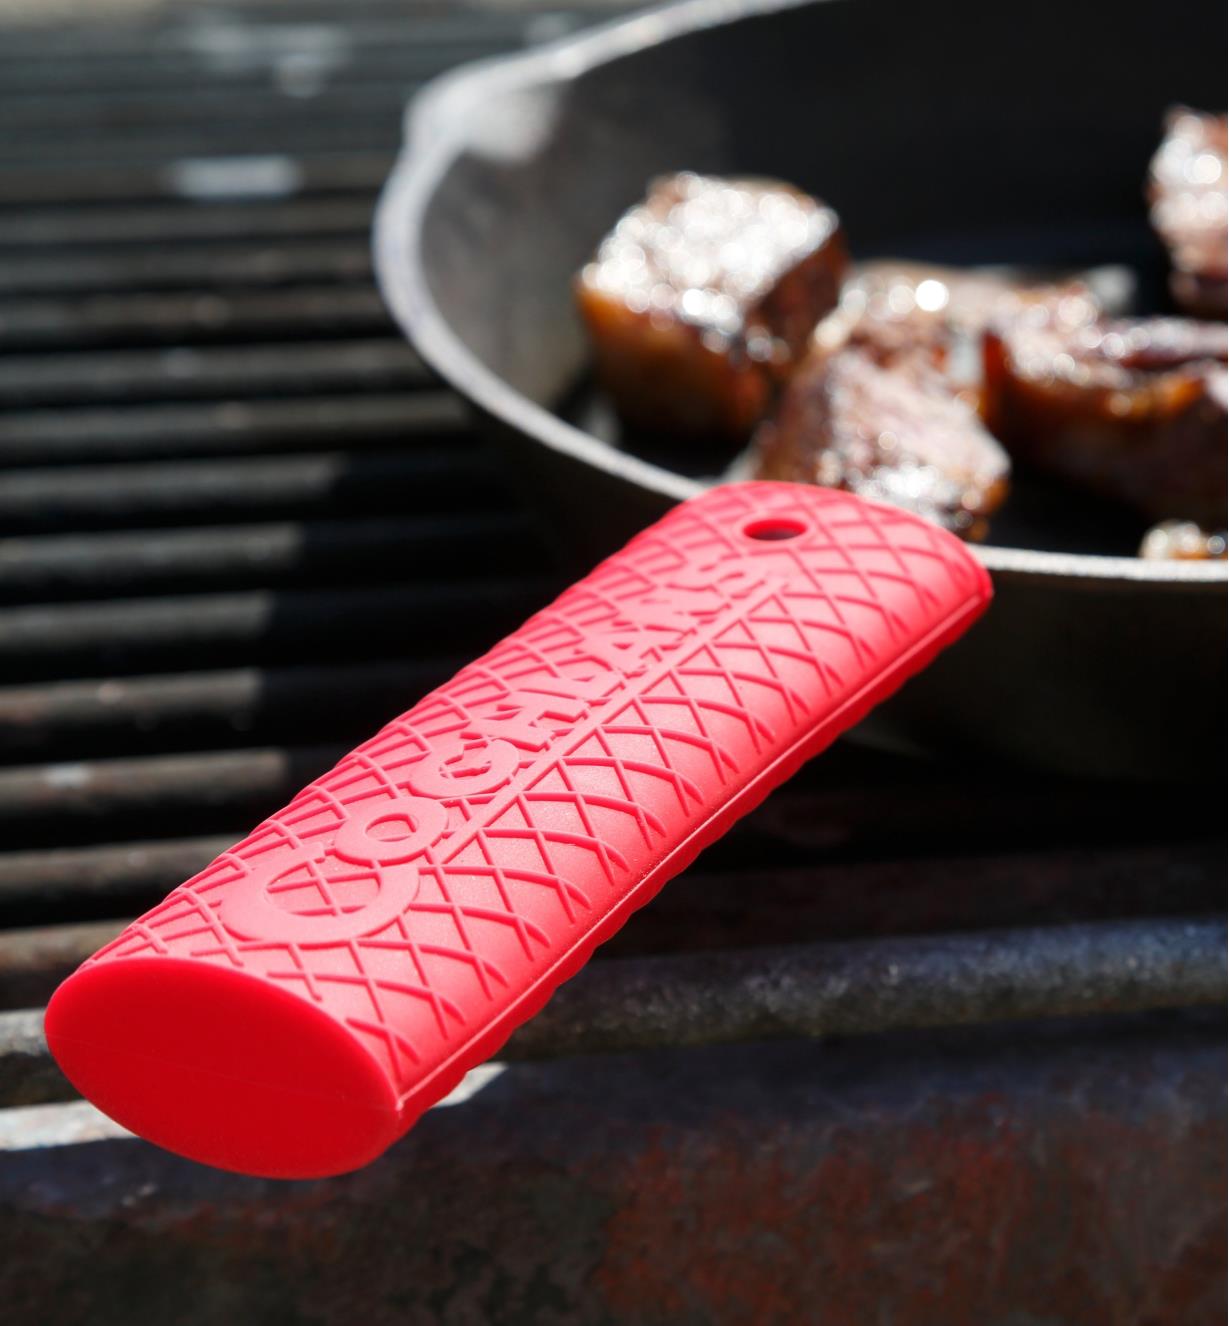 https://assets.leevalley.com/Size4/10102/09A0432-silicone-cast-iron-handle-grip-u-0001.jpg